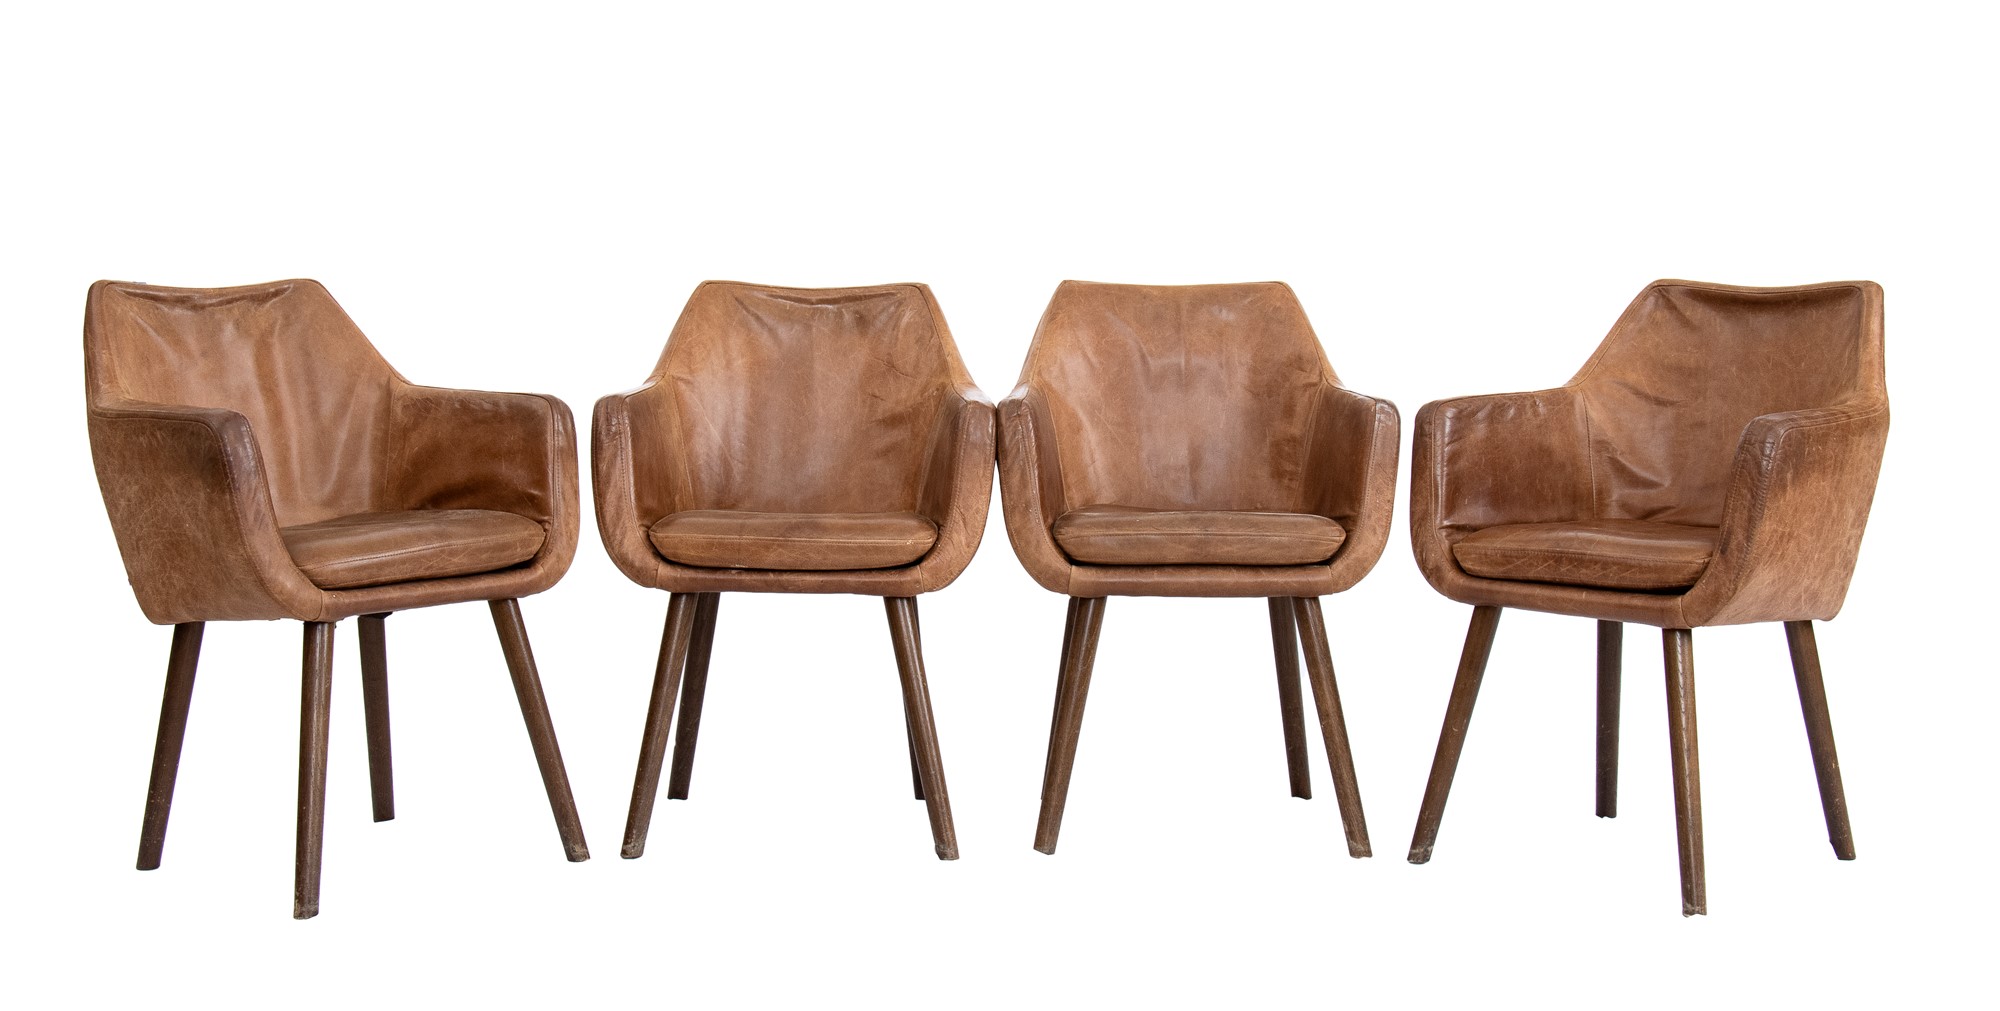 4 leather chairs. 20th century English manufacture